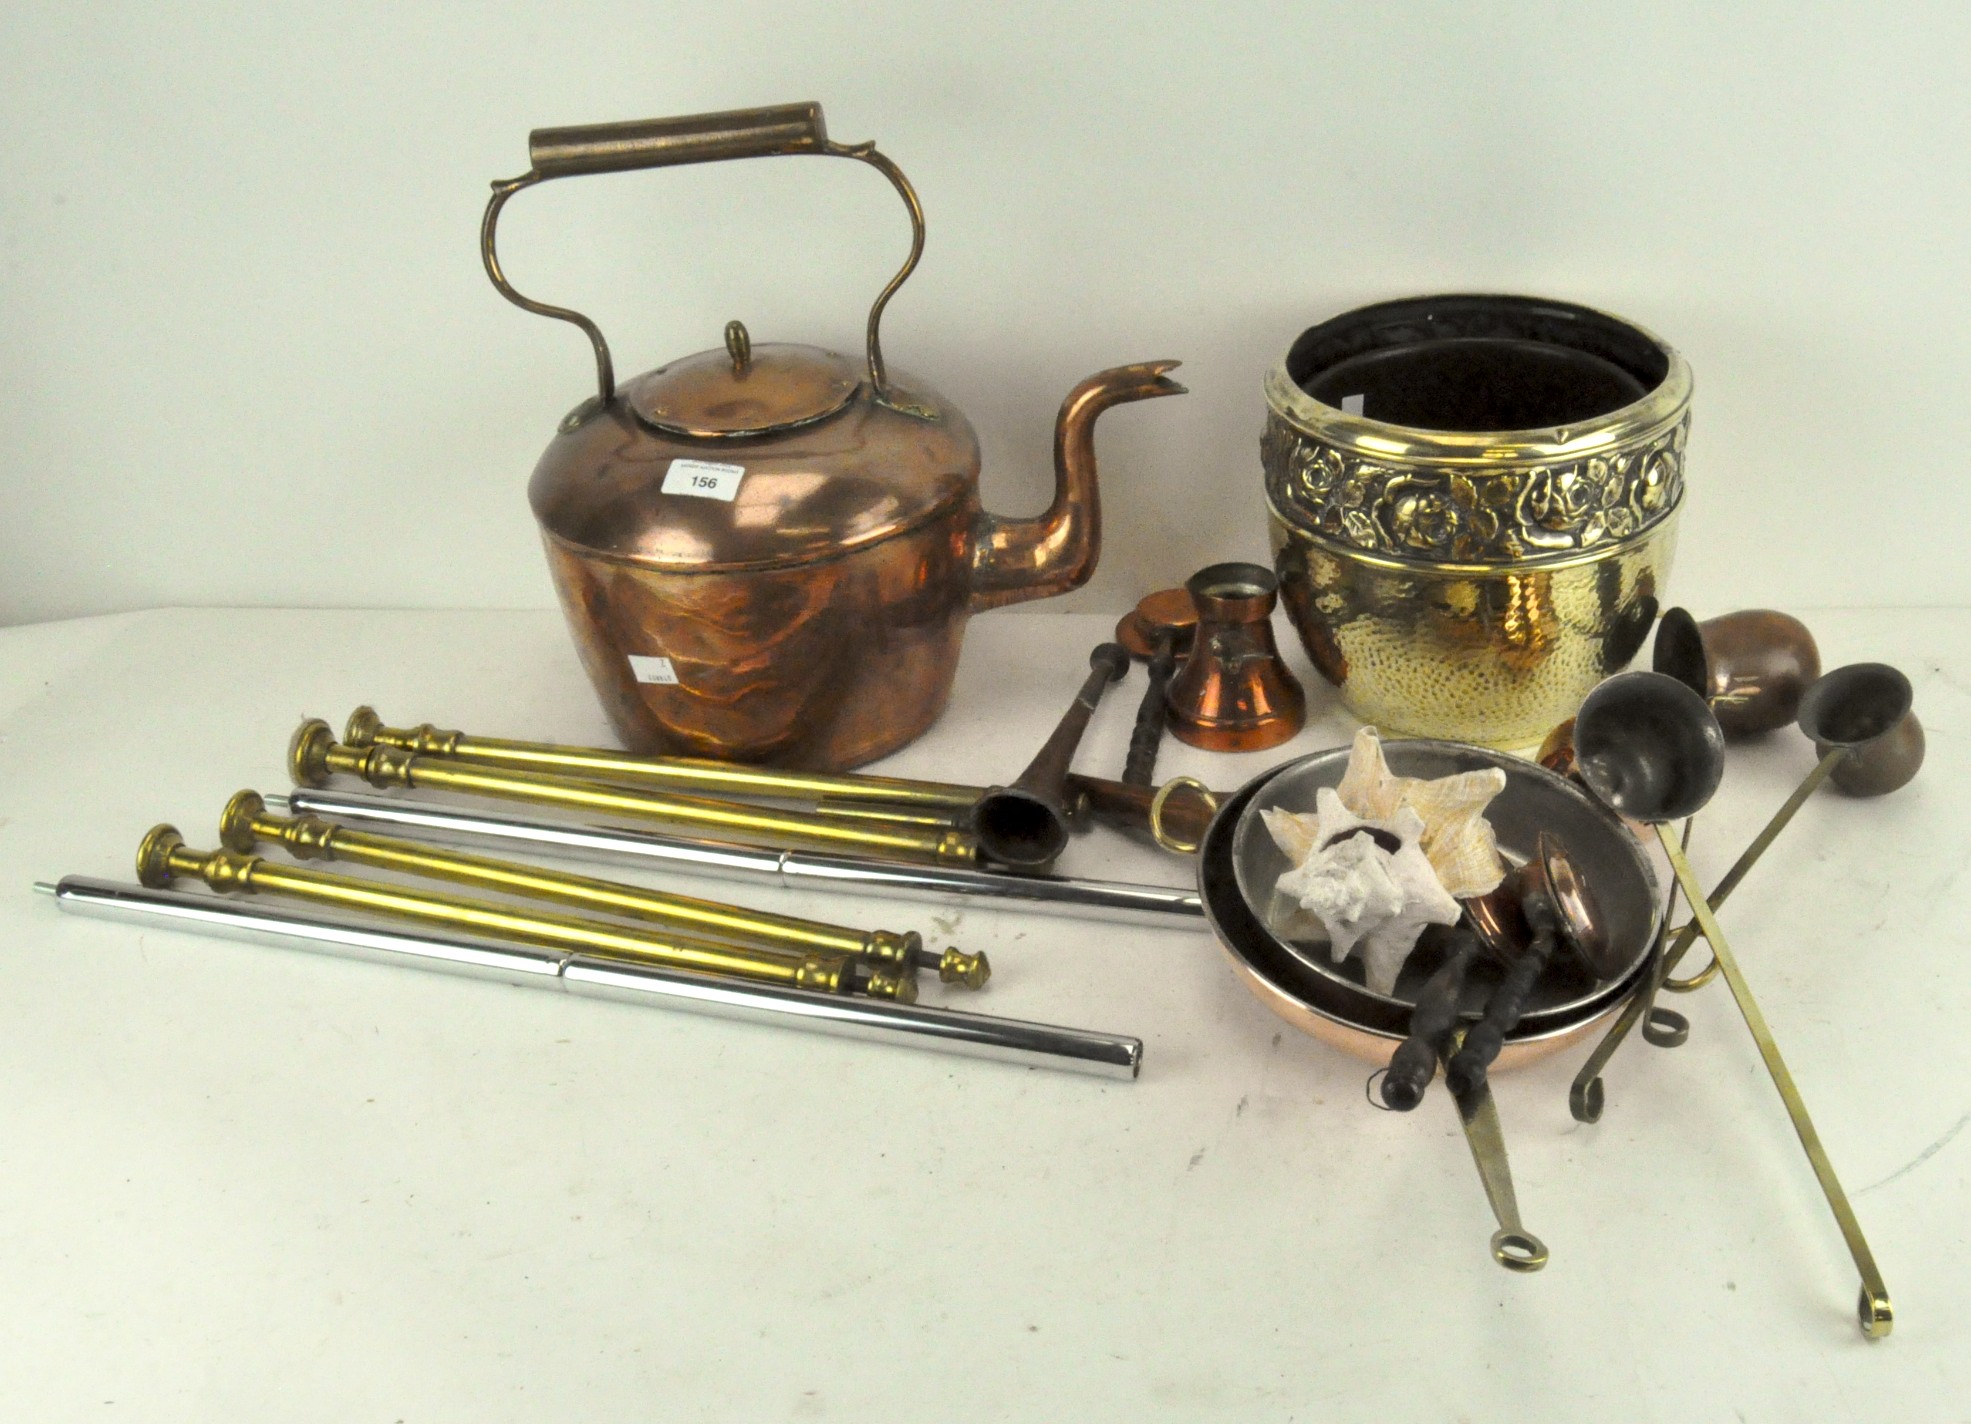 Assorted vintage copper and brassware including a large kettle, pans, pots and a set of whisky,